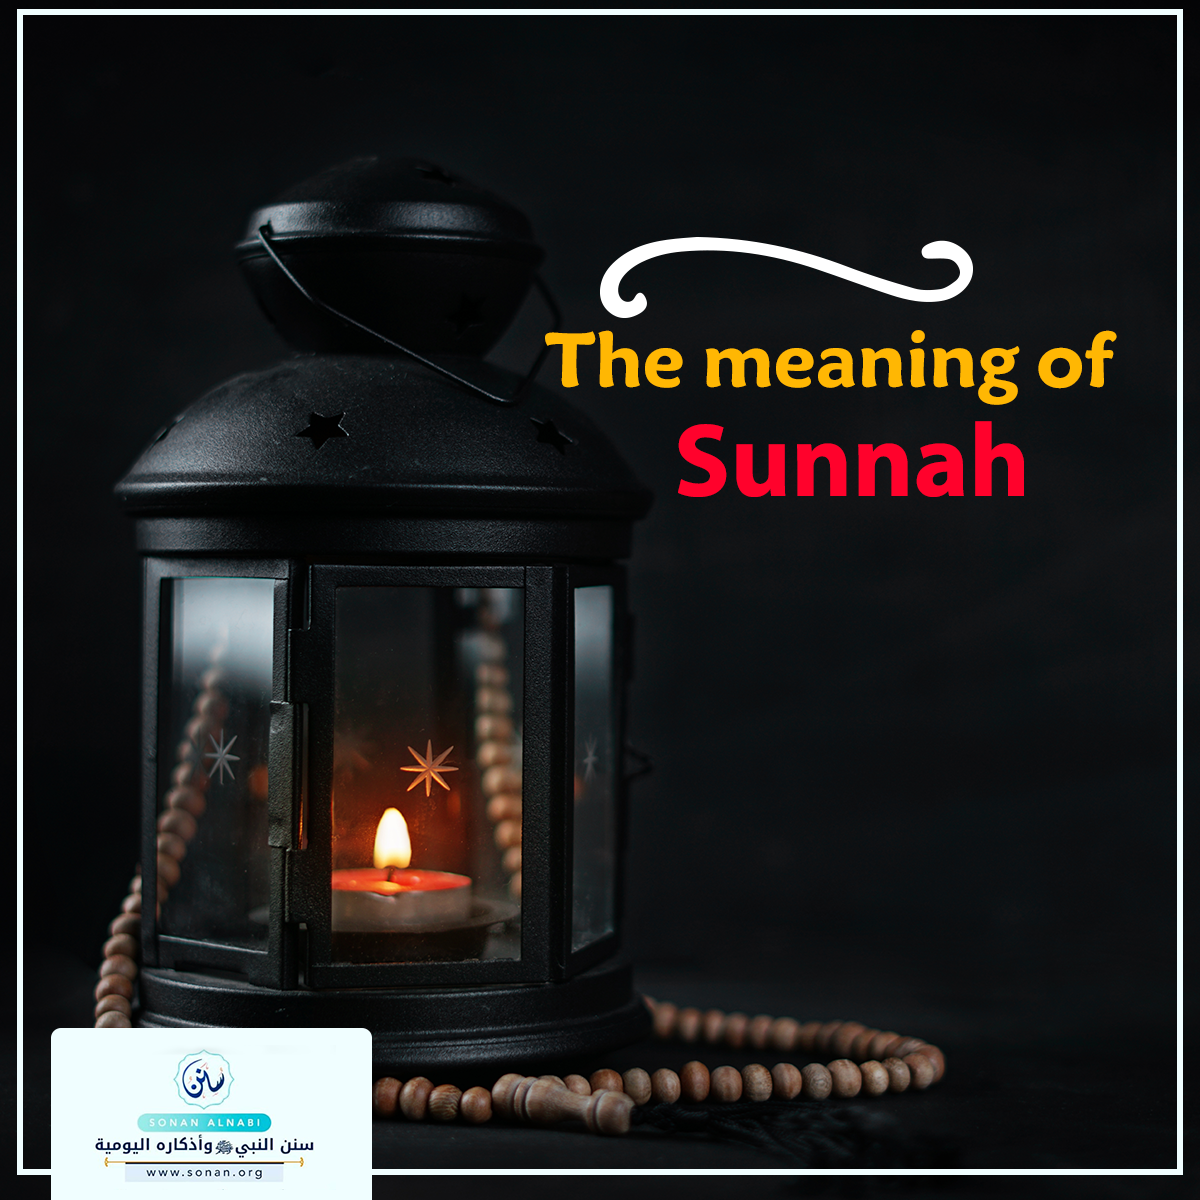 The meaning of Sunnah